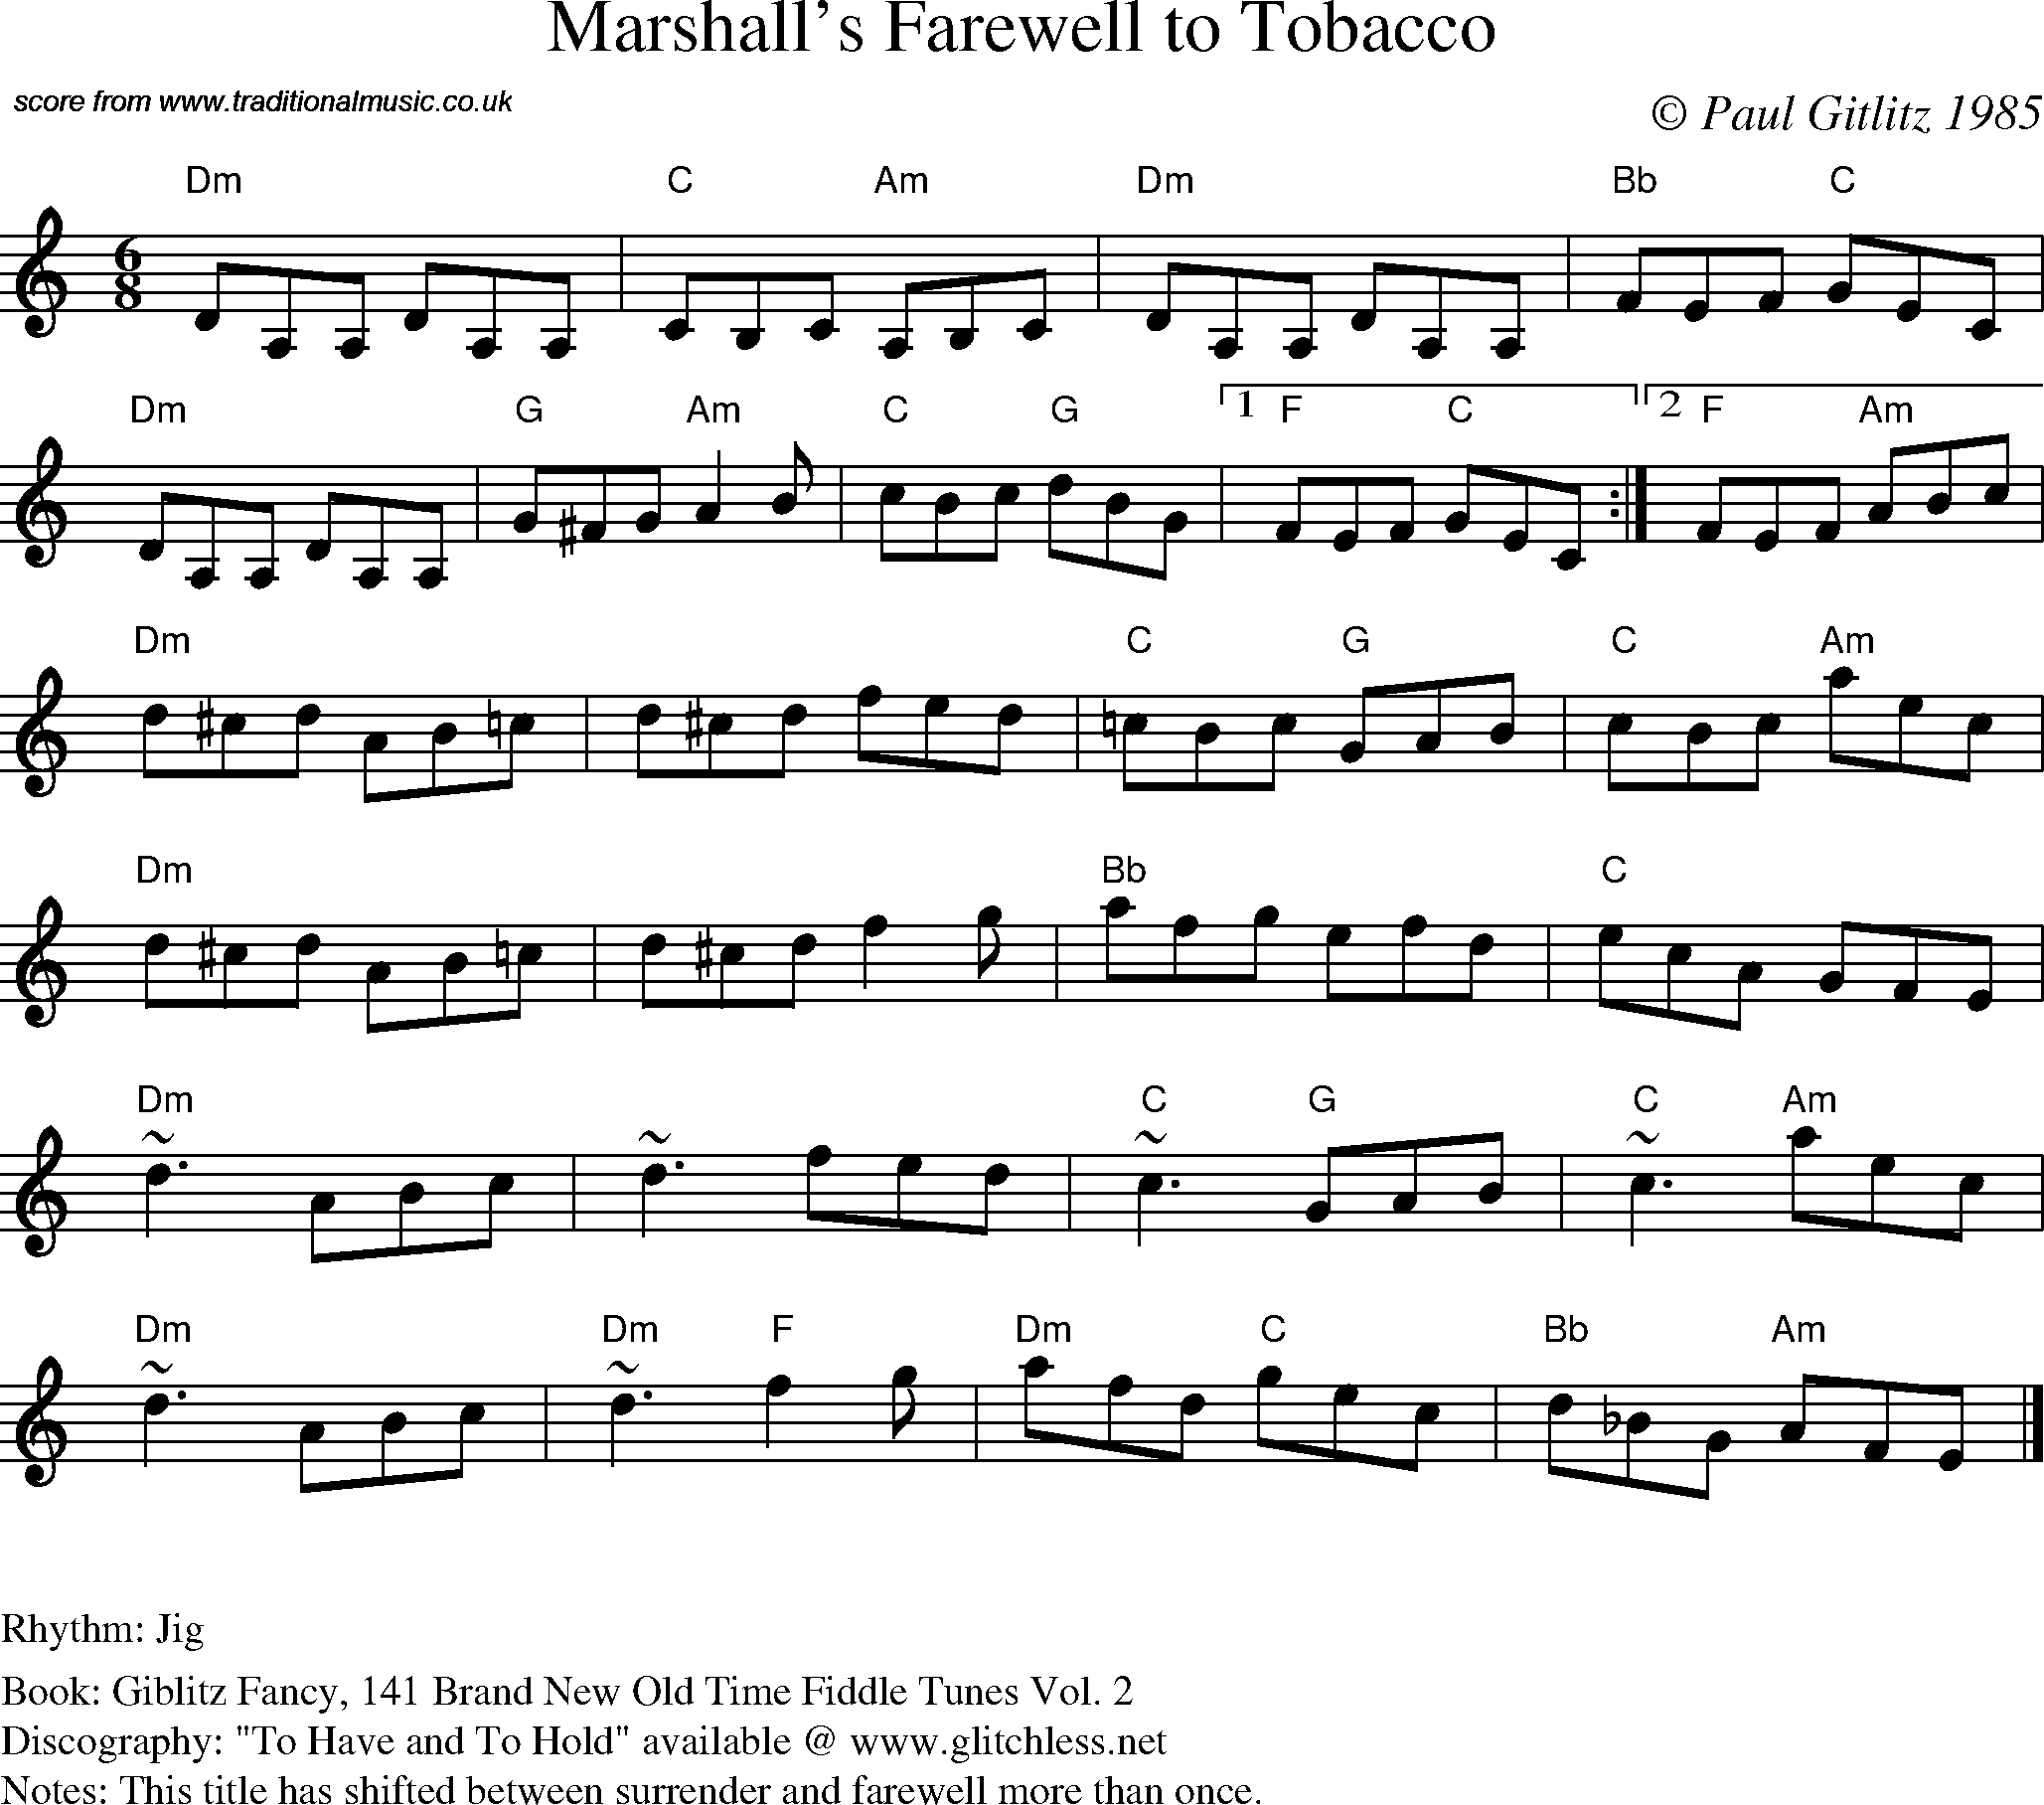 Sheet Music Score for Jig - Marshall's Farewell to Tobacco